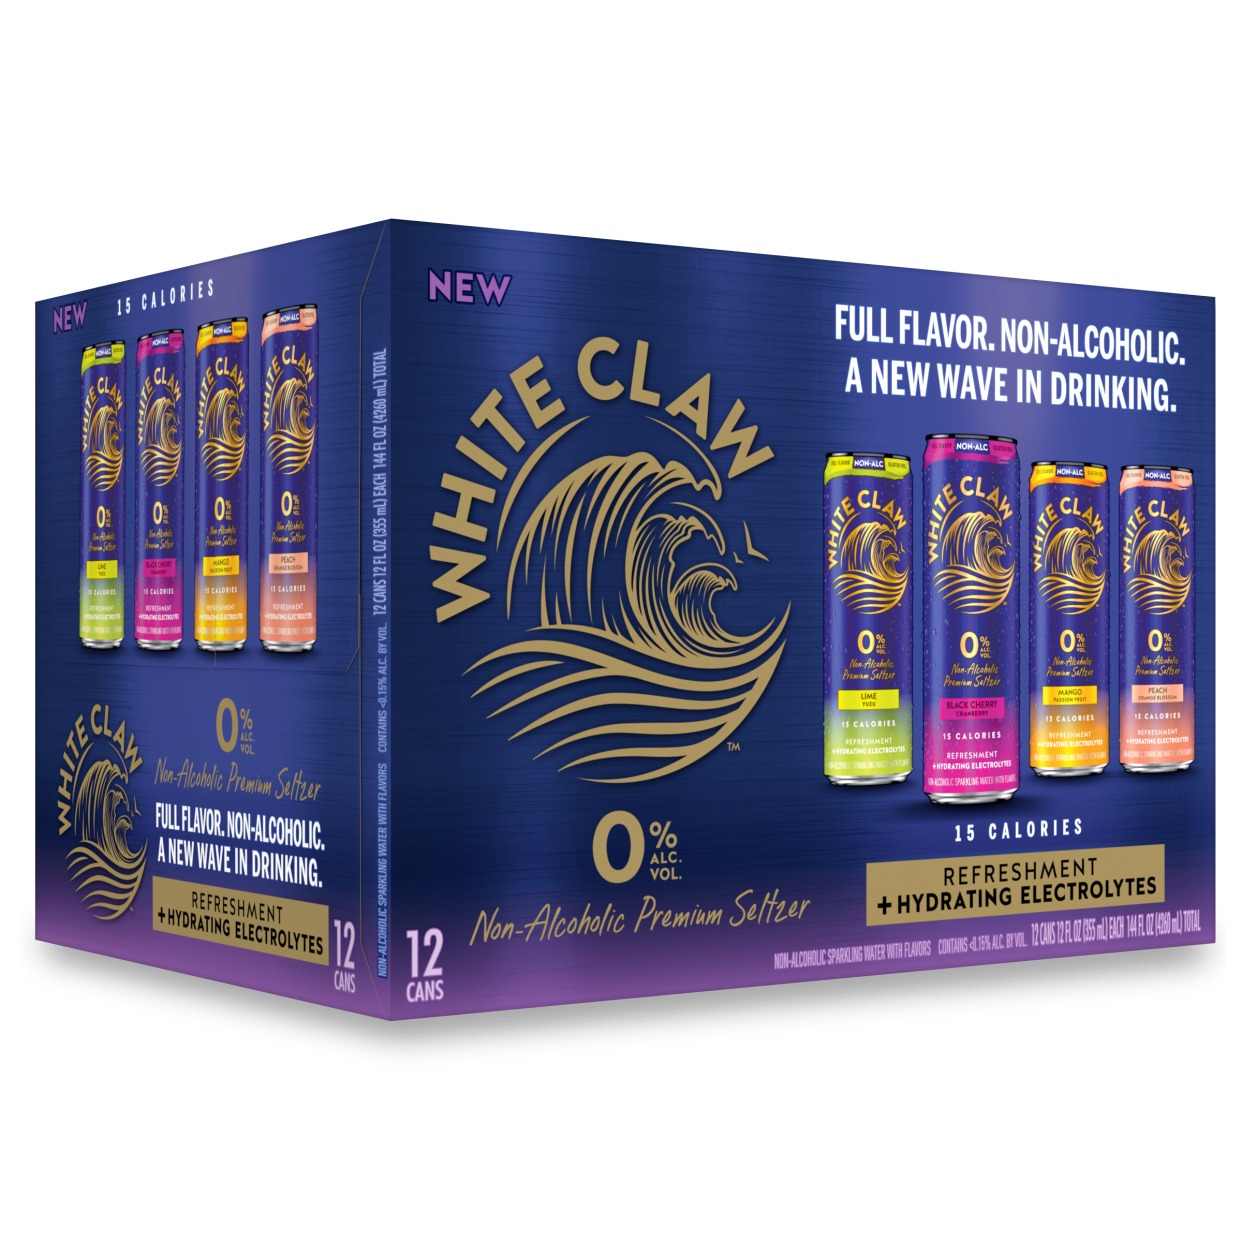 White Claw announced Tuesday it is launching White Claw 0% Alcohol, a non-alcoholic version of its popular hard seltzer.